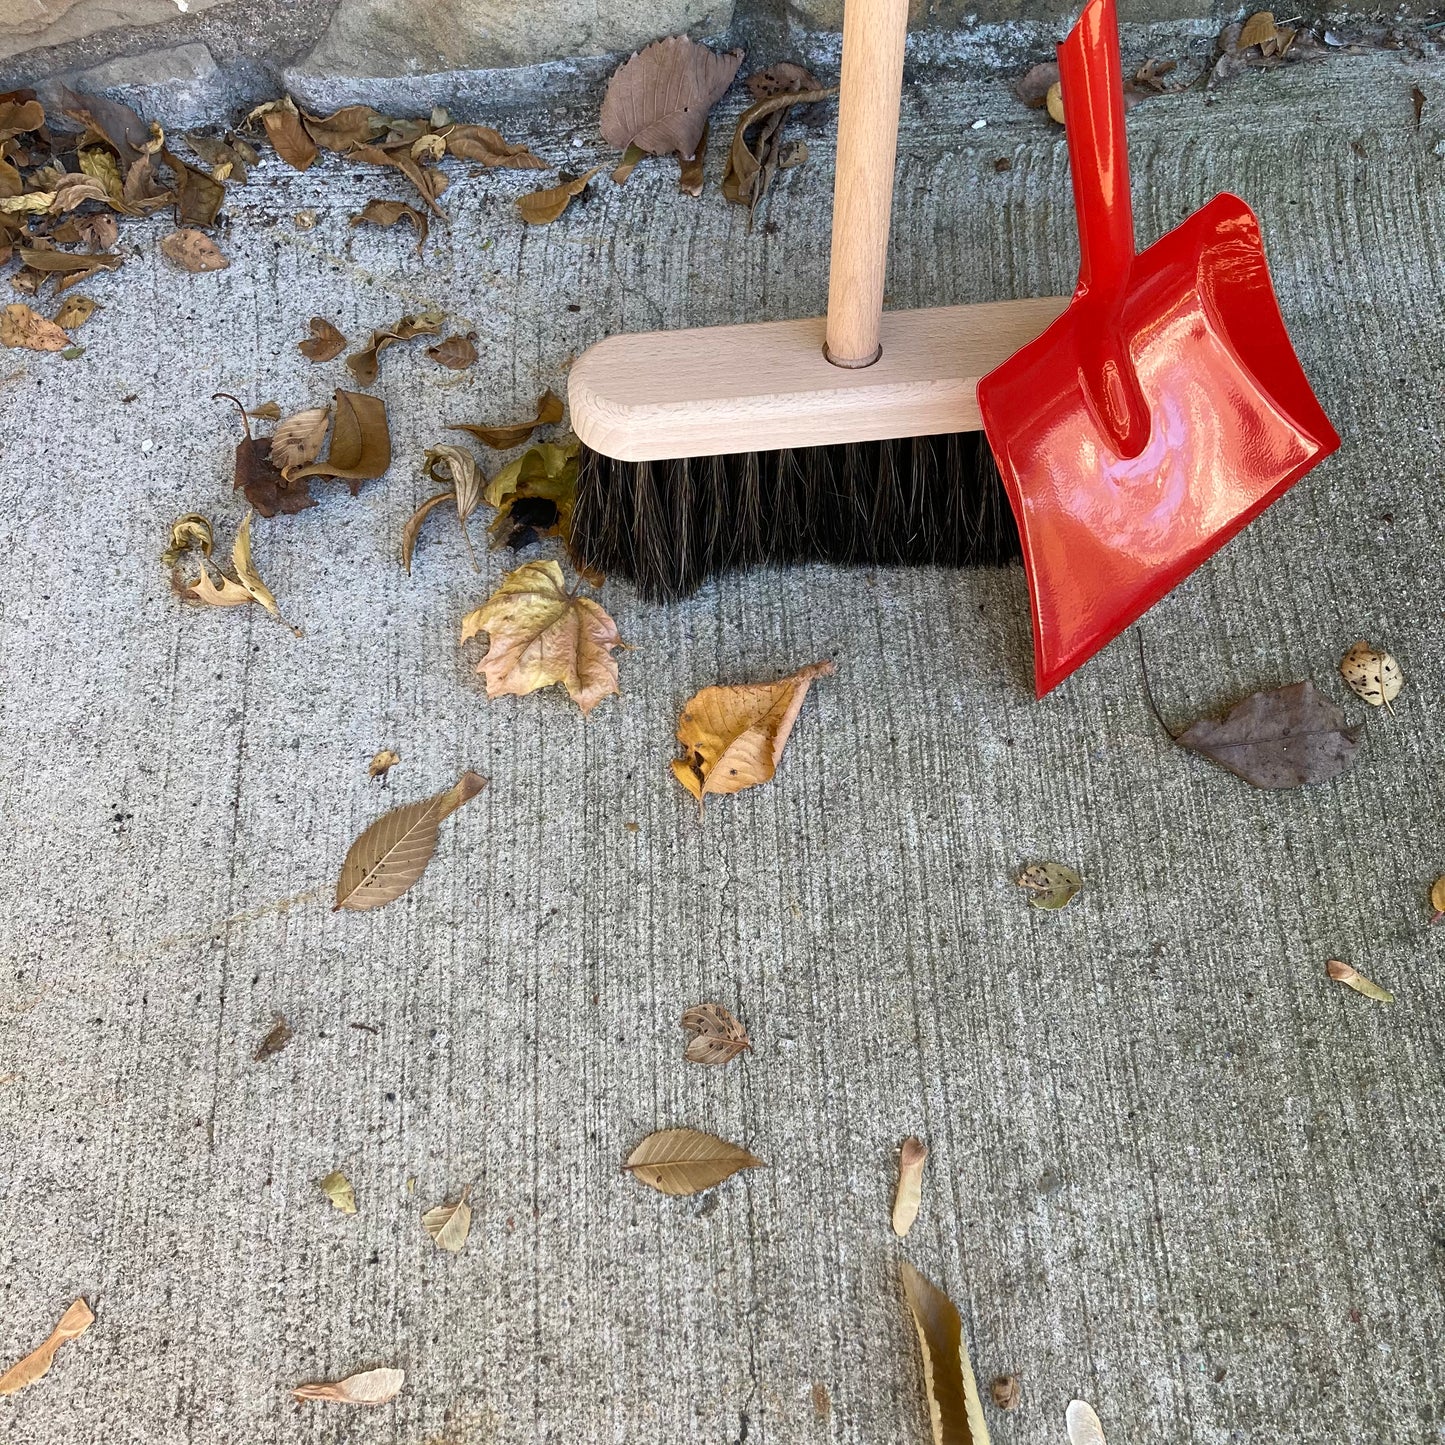 Child's WOODEN BROOM and Red Metal DUST PAN